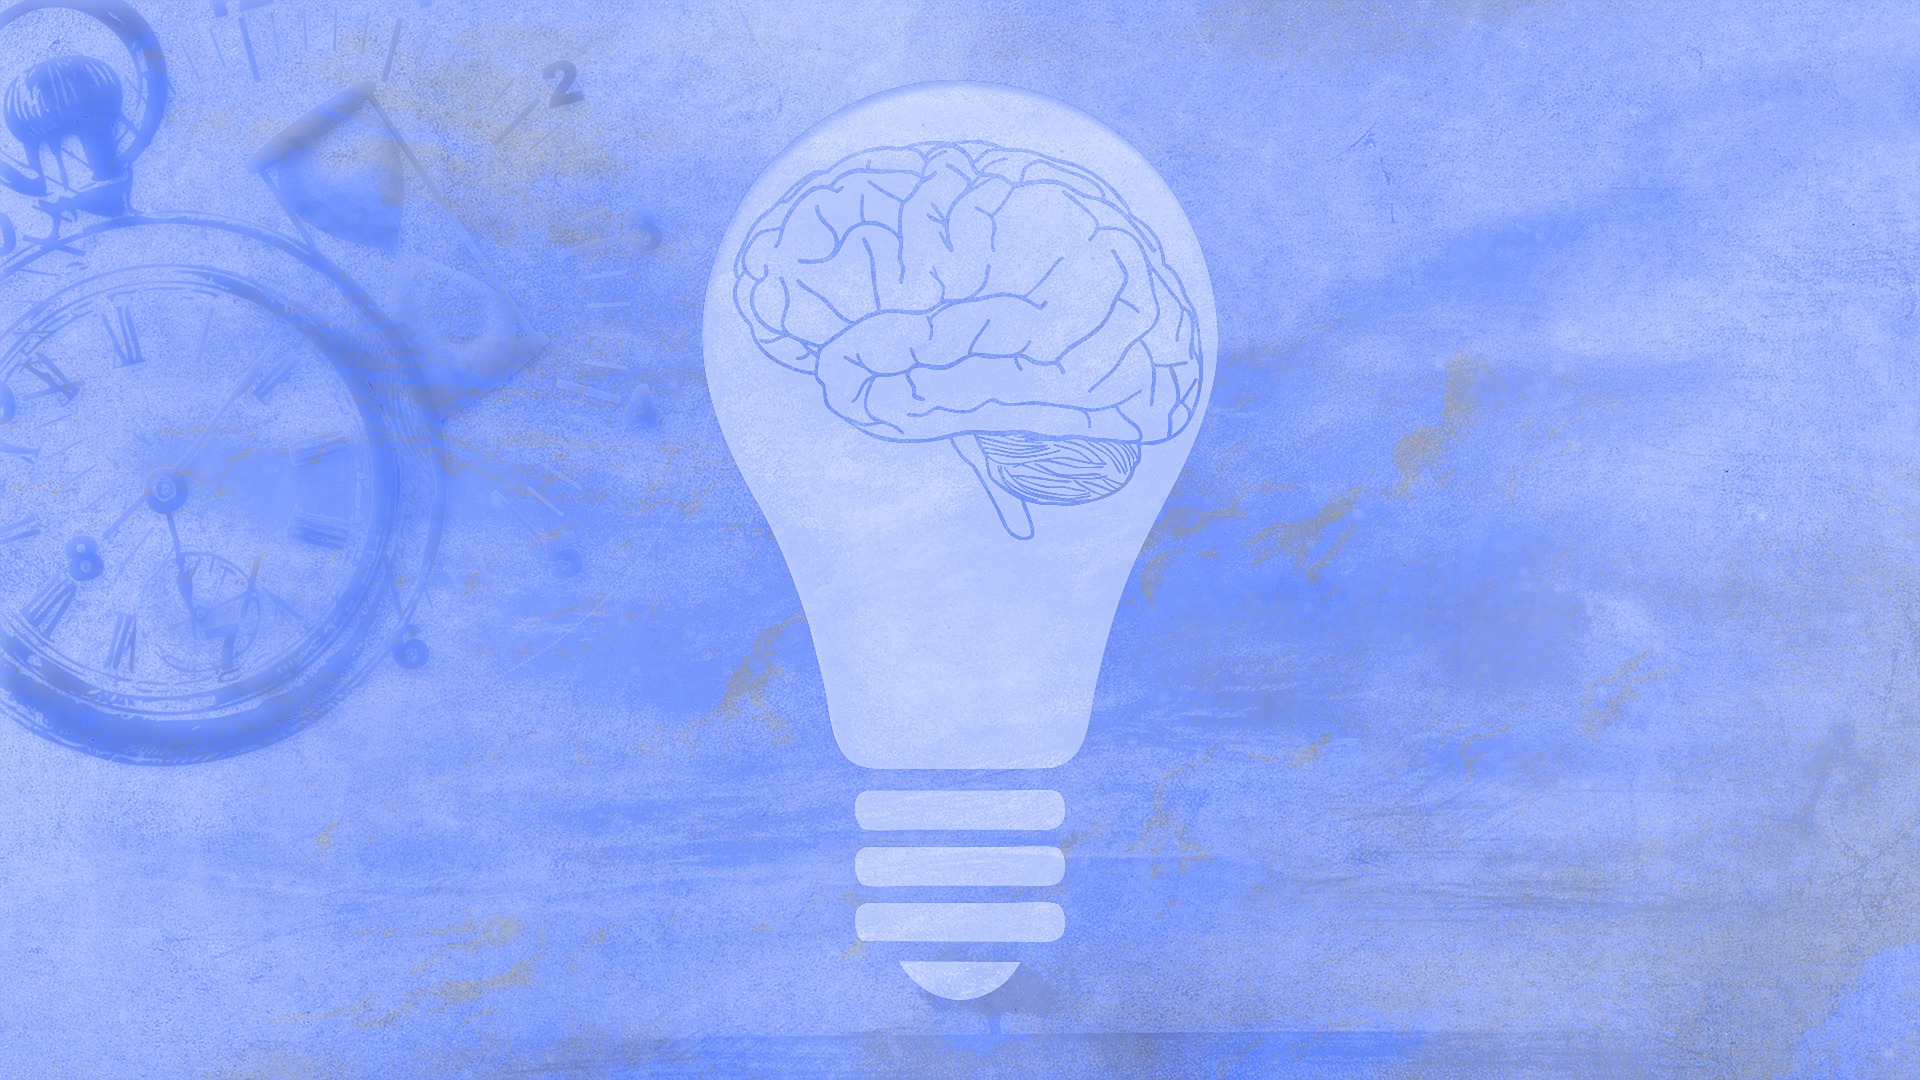 a blue background with an image of a brain inside a lightbulb